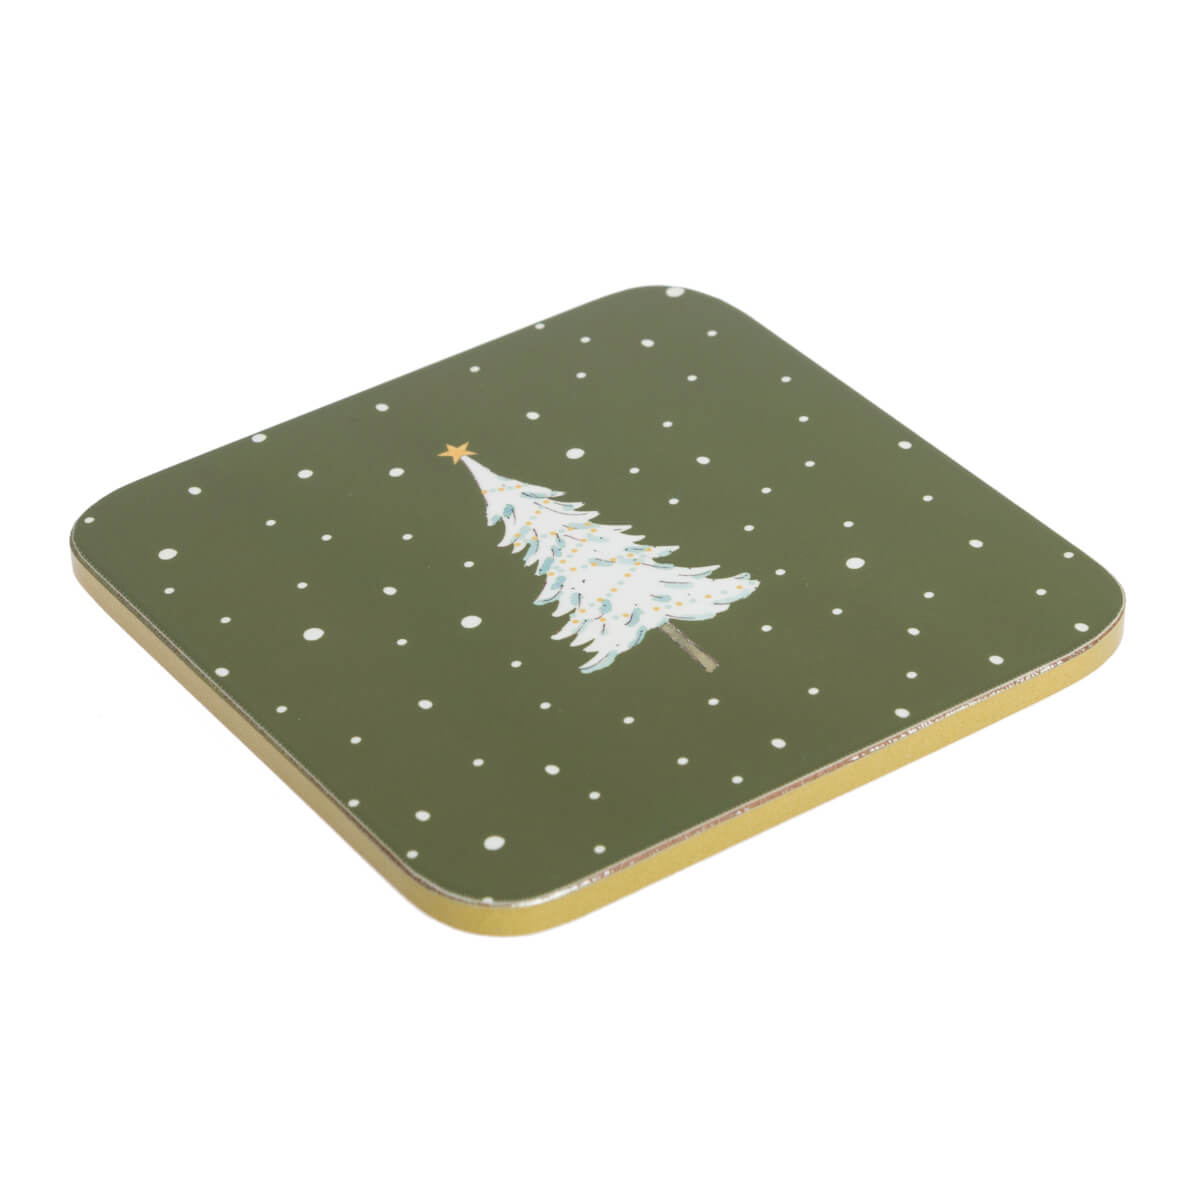 Festive Forest Coasters (Set of 4)